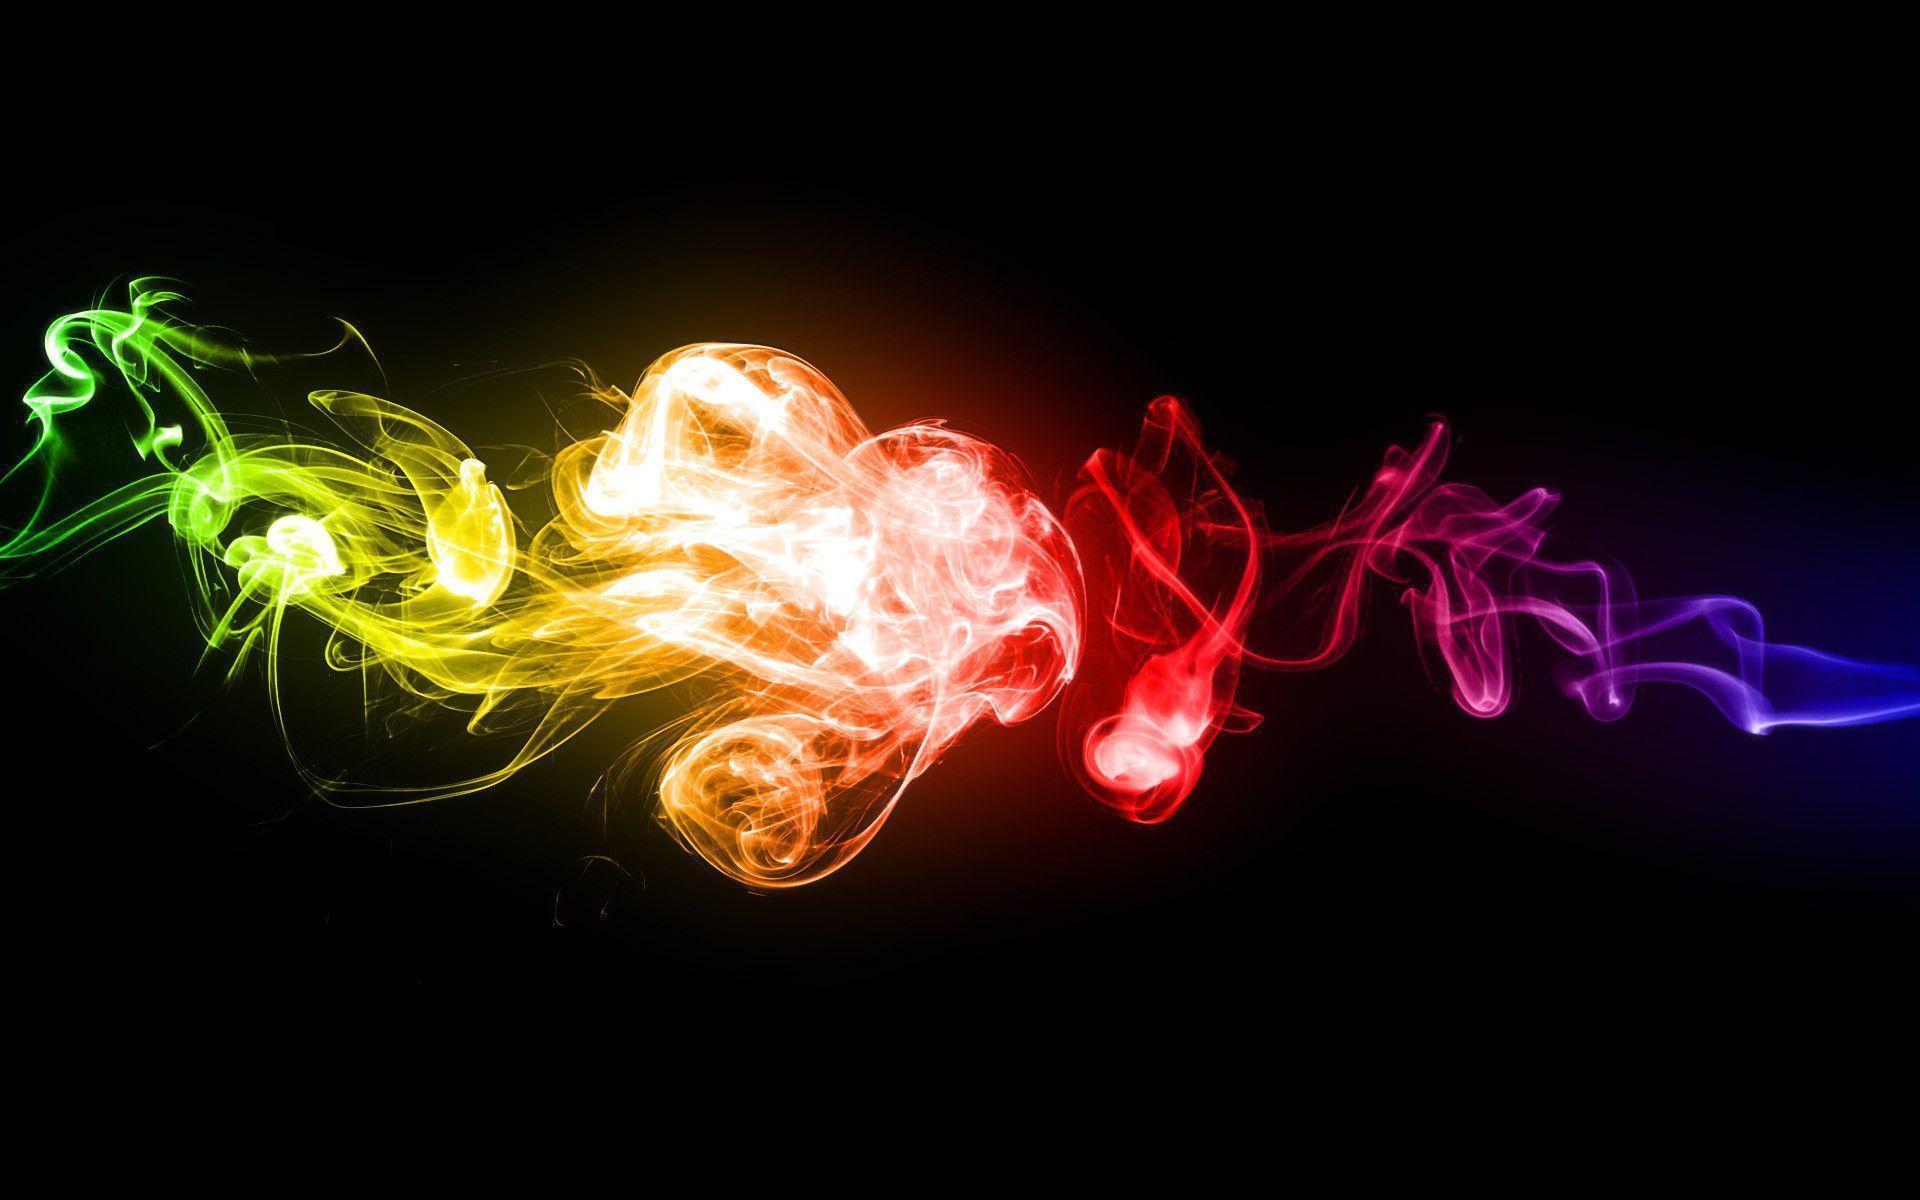 Wallpaper For > Colorful Weed Smoke Background